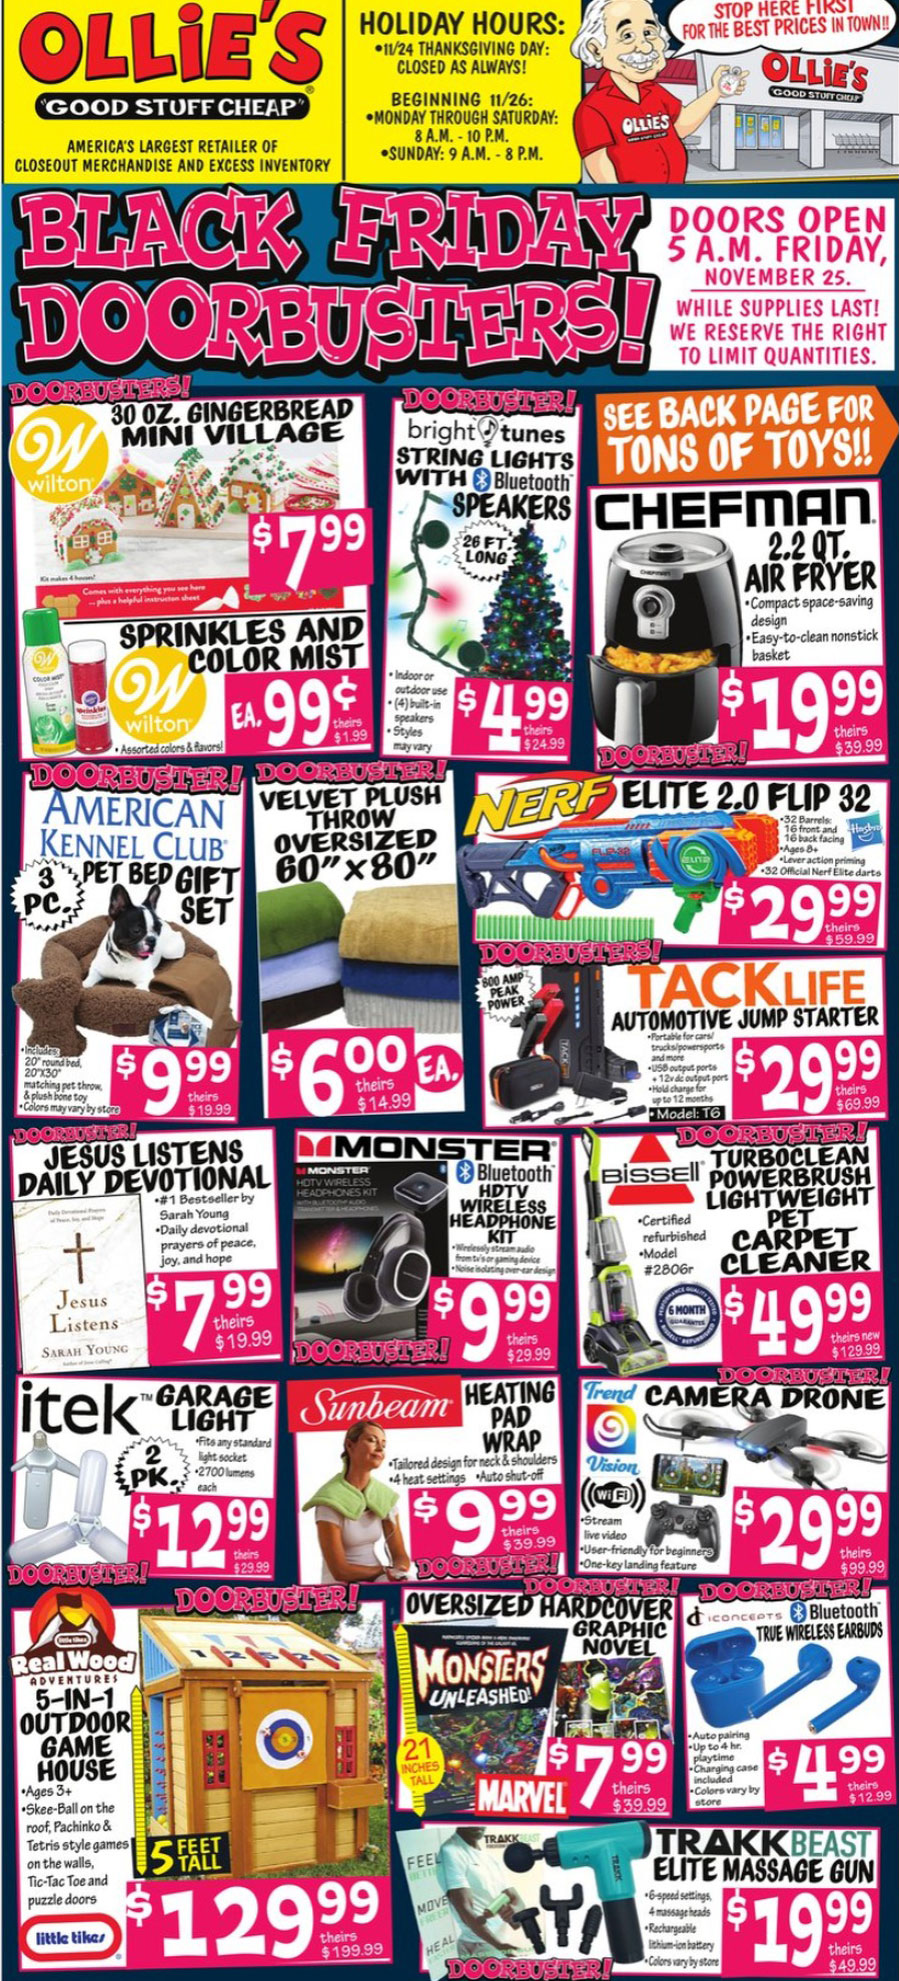 Ollie's Bargain Outlet Black Friday 2023 Ad and Deals